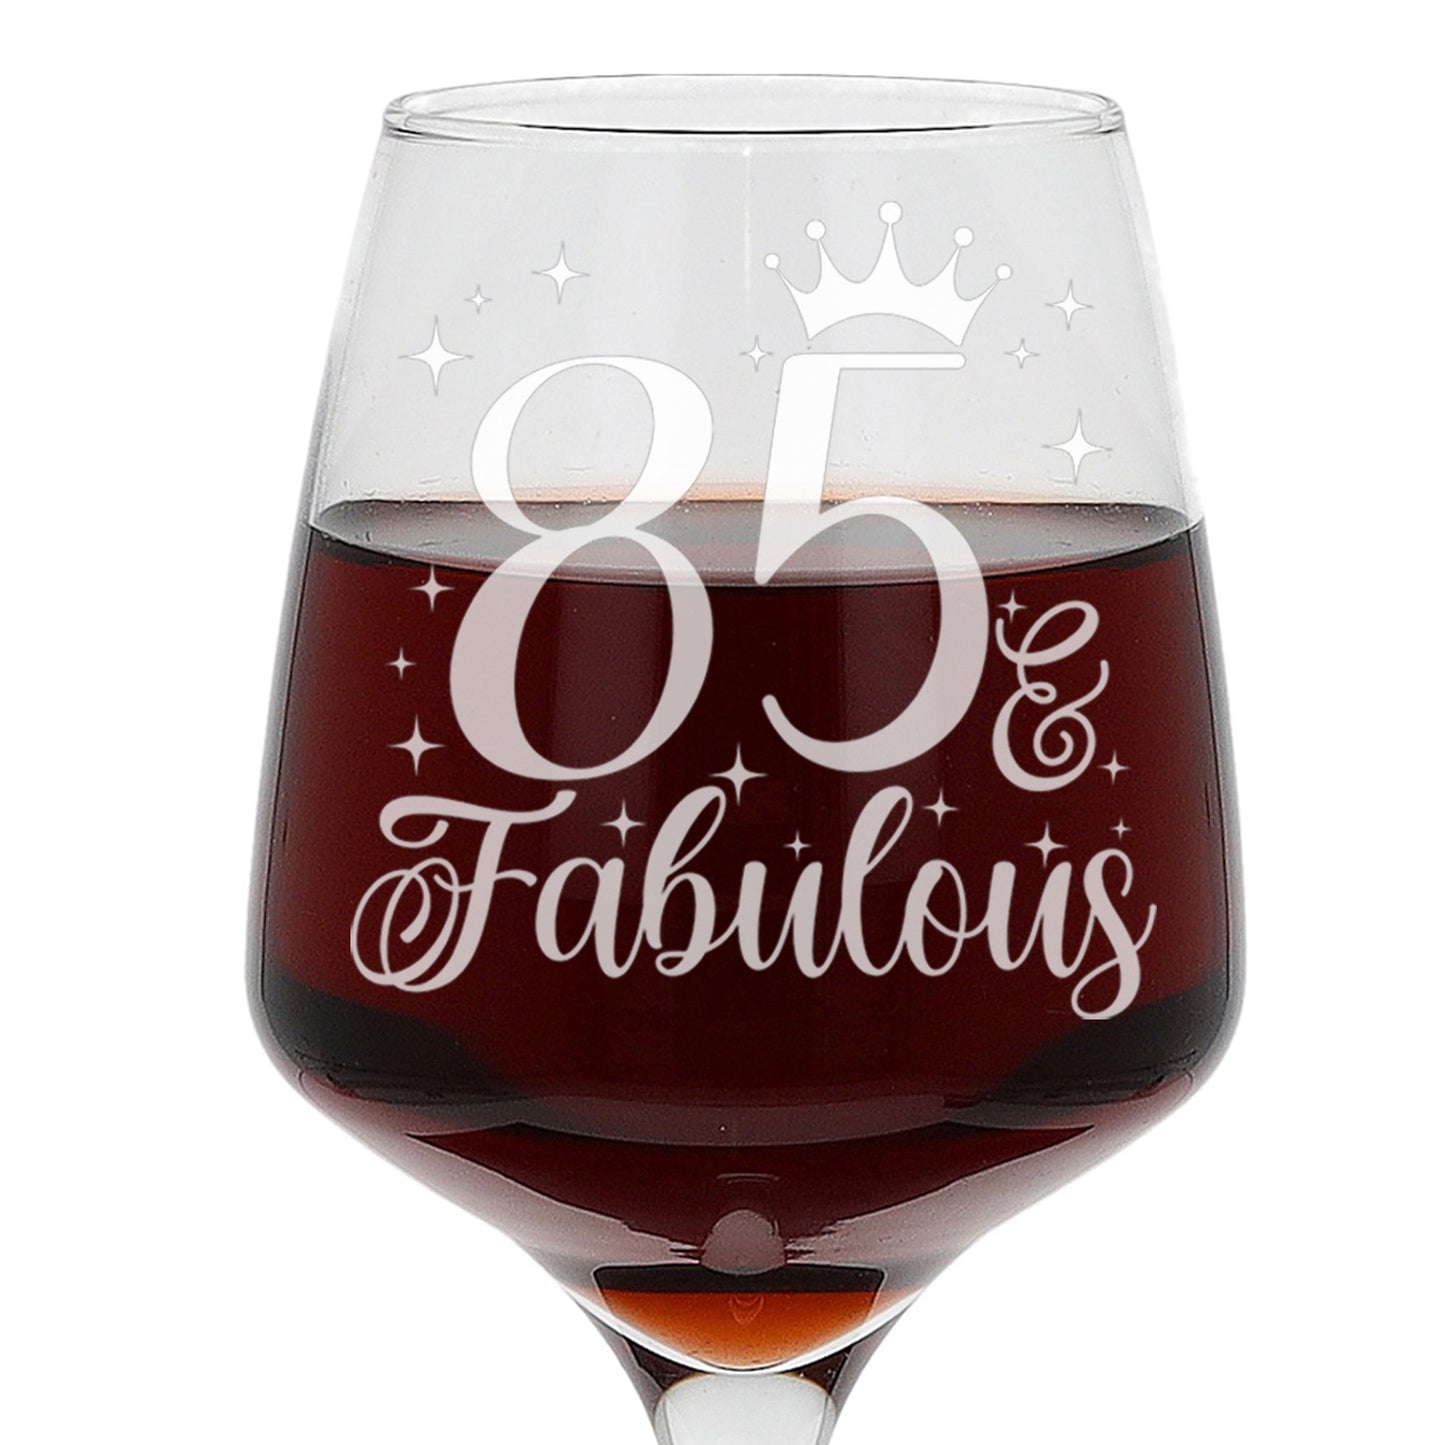 85 & Fabulous 85th Birthday Gift Engraved Wine Glass and/or Coaster Set  - Always Looking Good -   